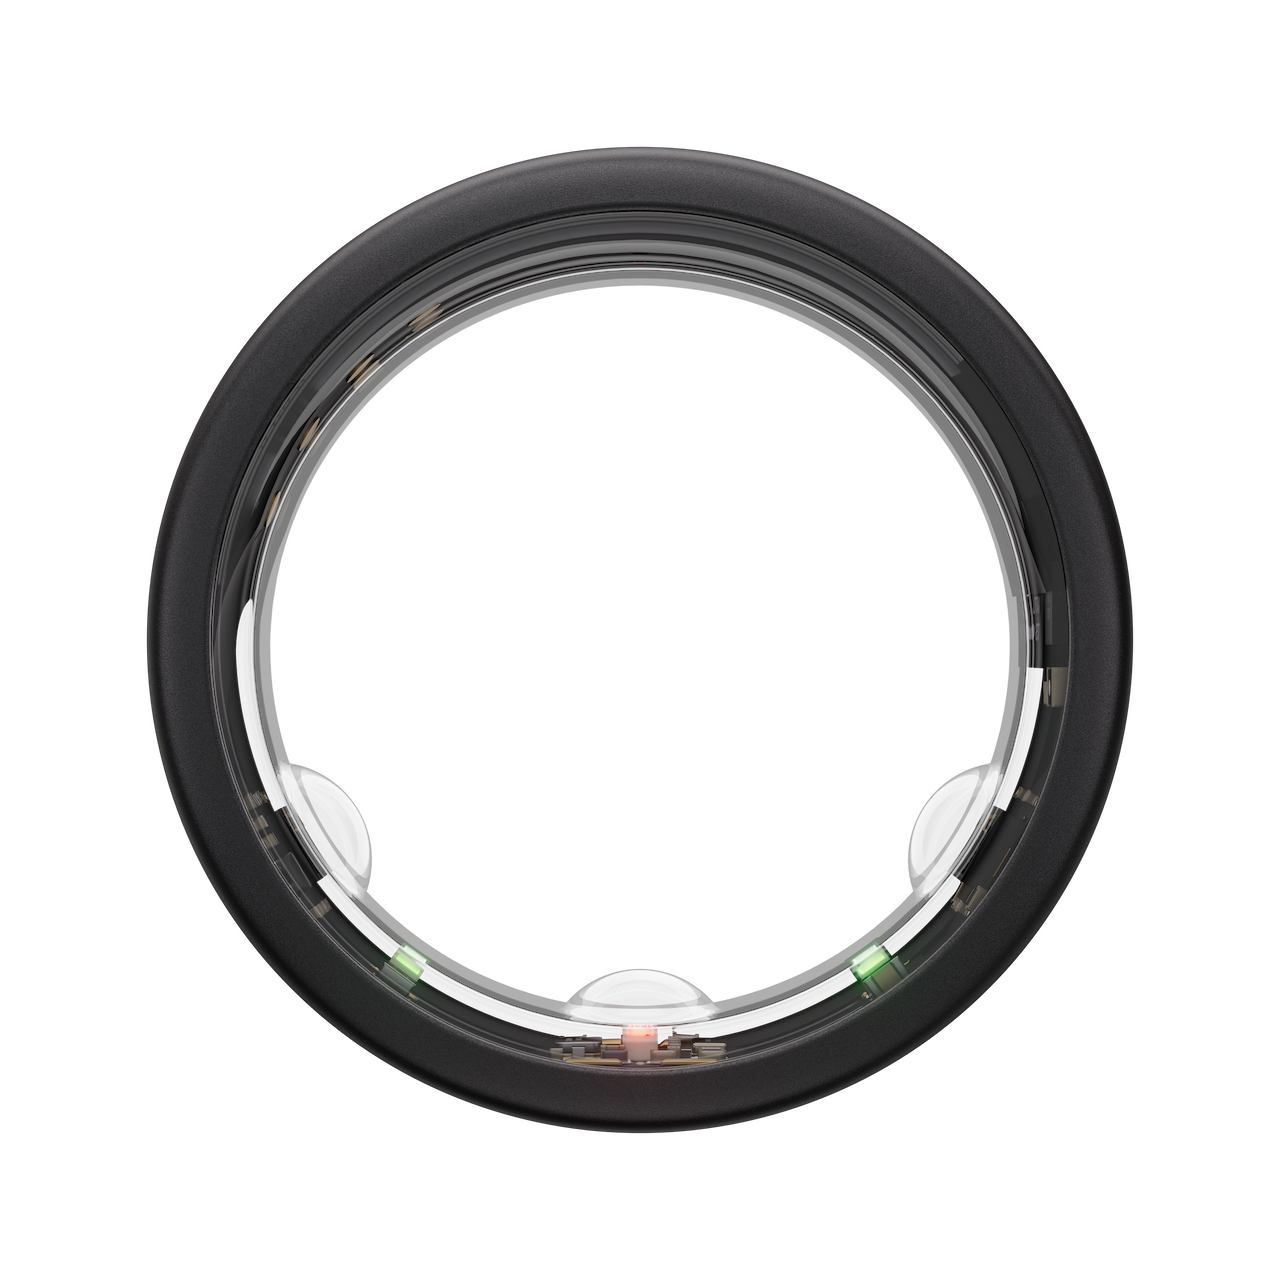 the stealth horizon model oura ring generation 3 viewed from the side